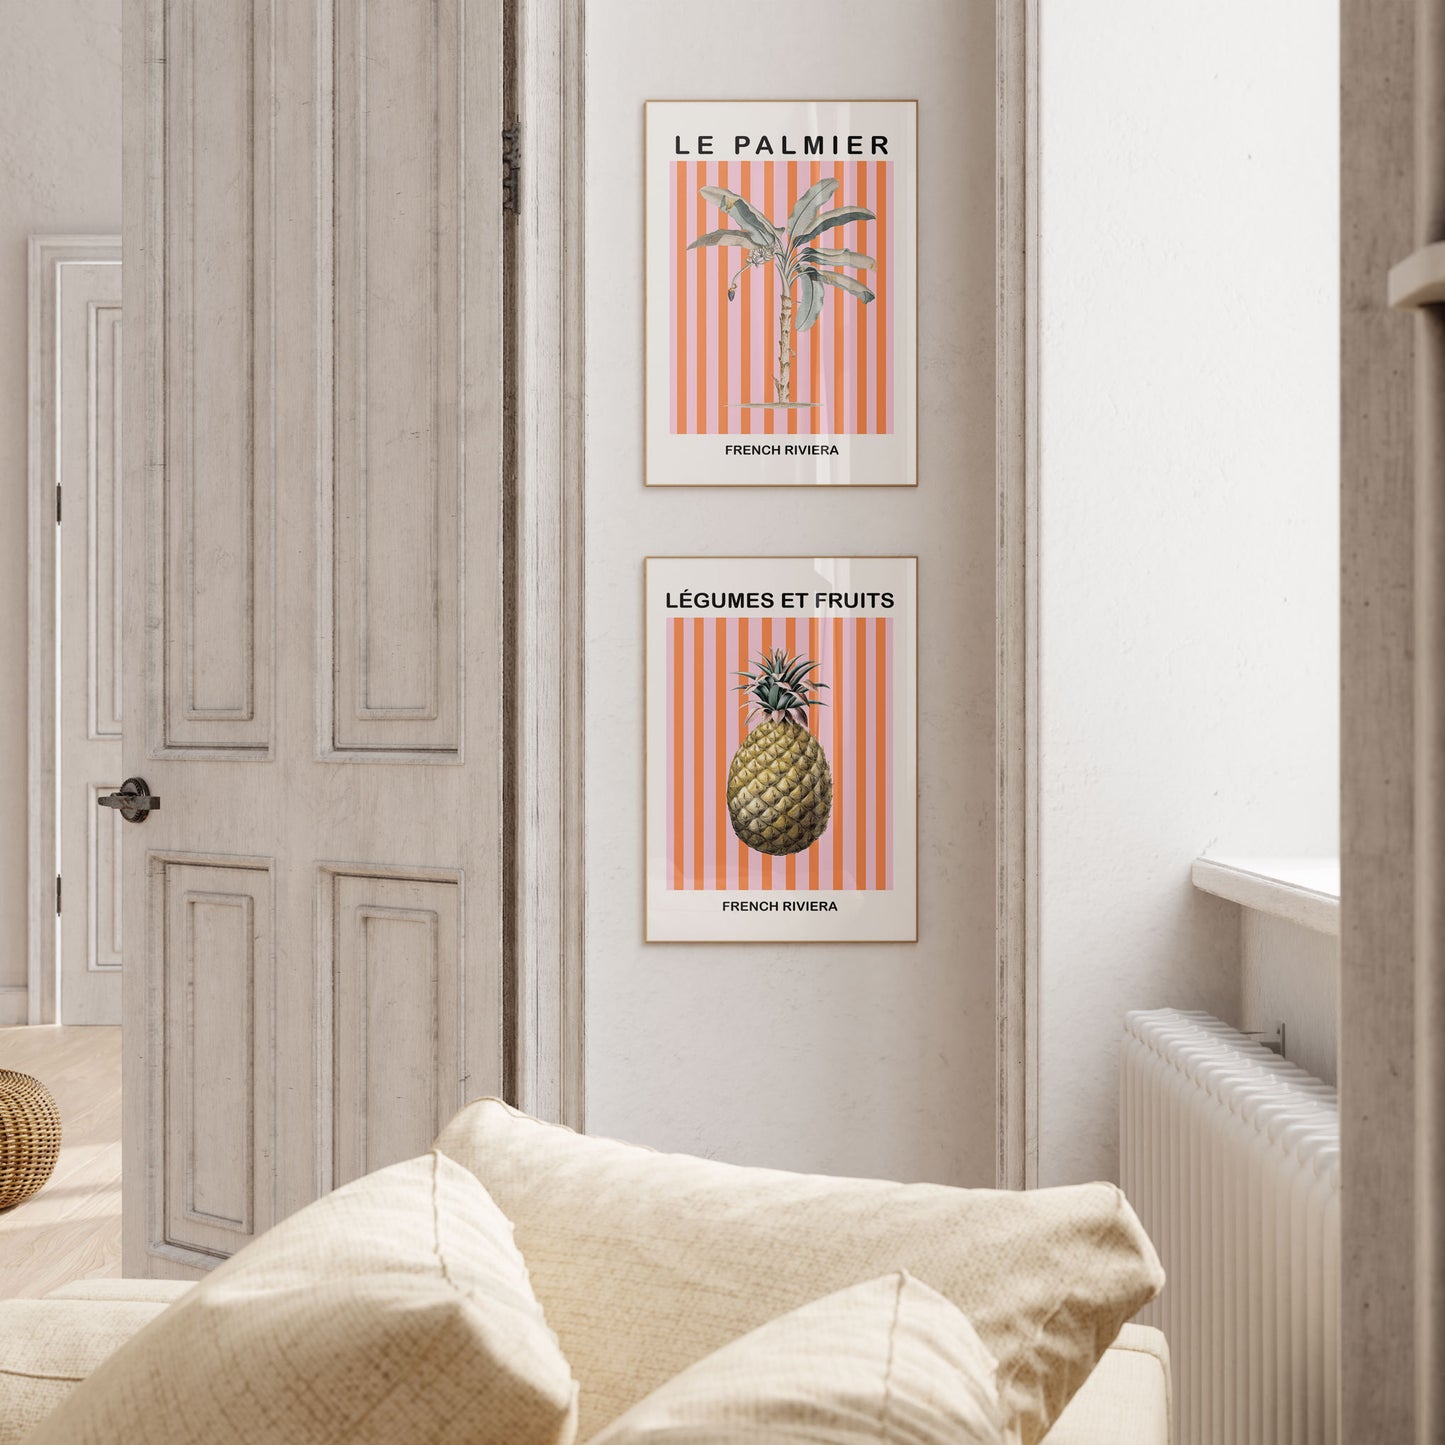 Striped Palm Tree Poster